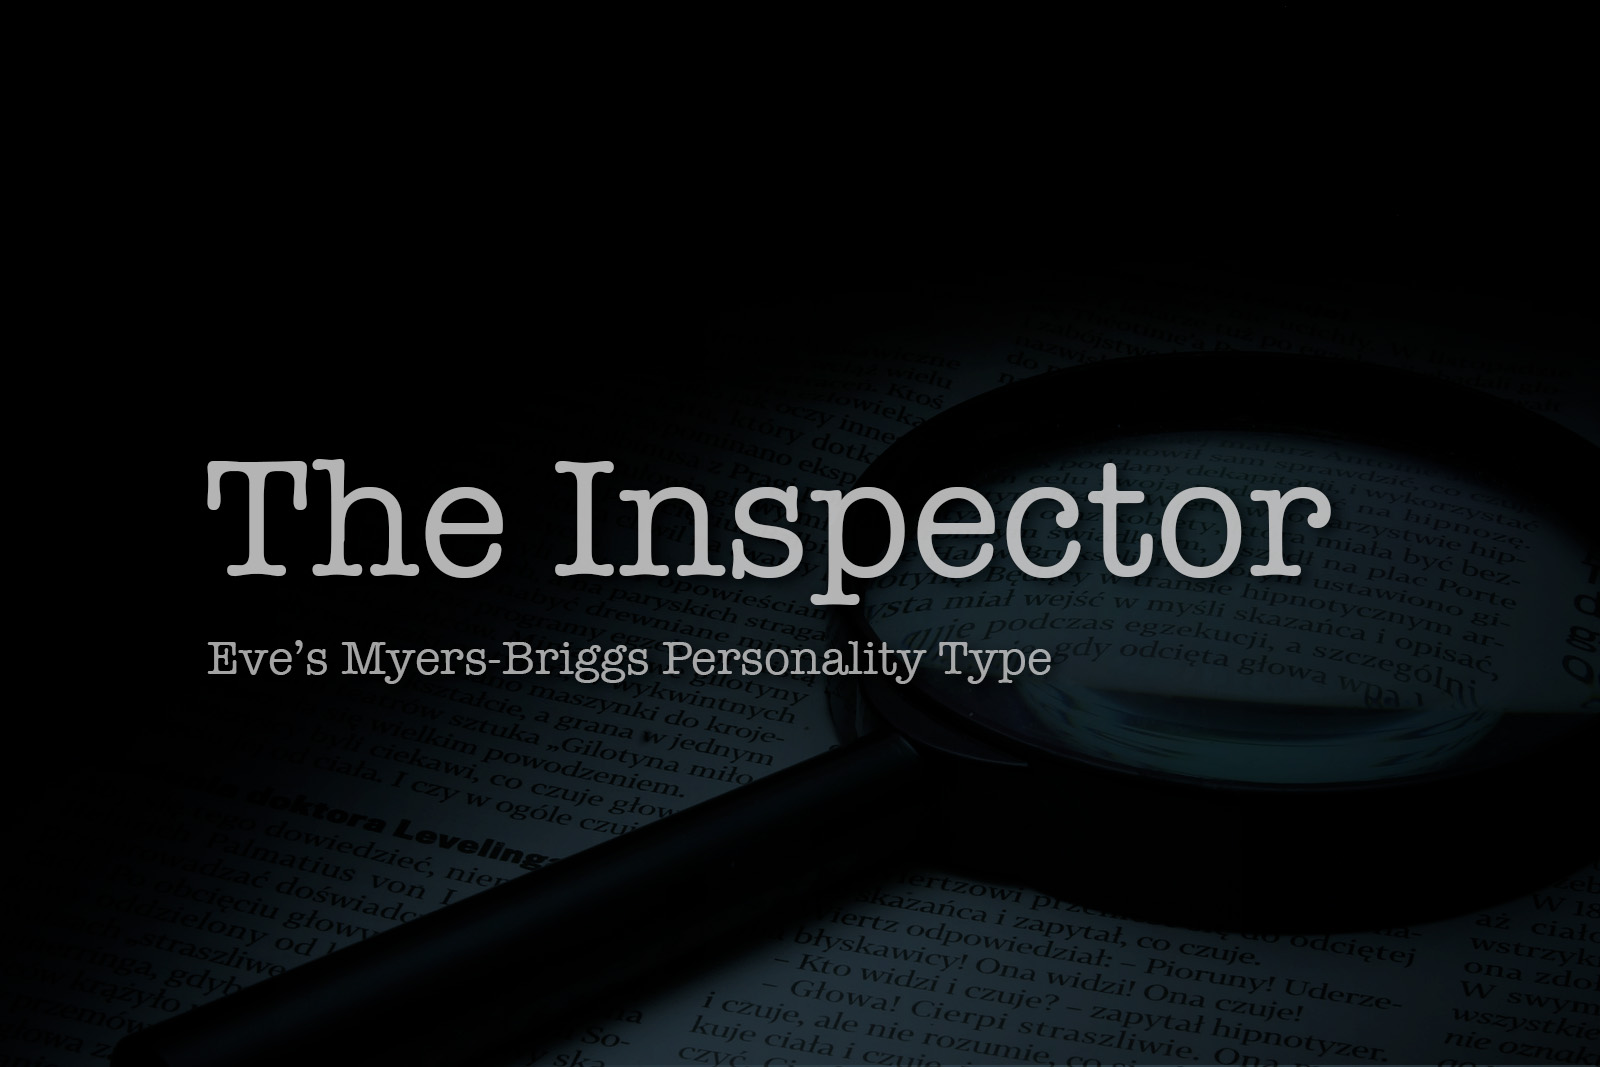 The Inspector: Eve’s Myers-Briggs Personality